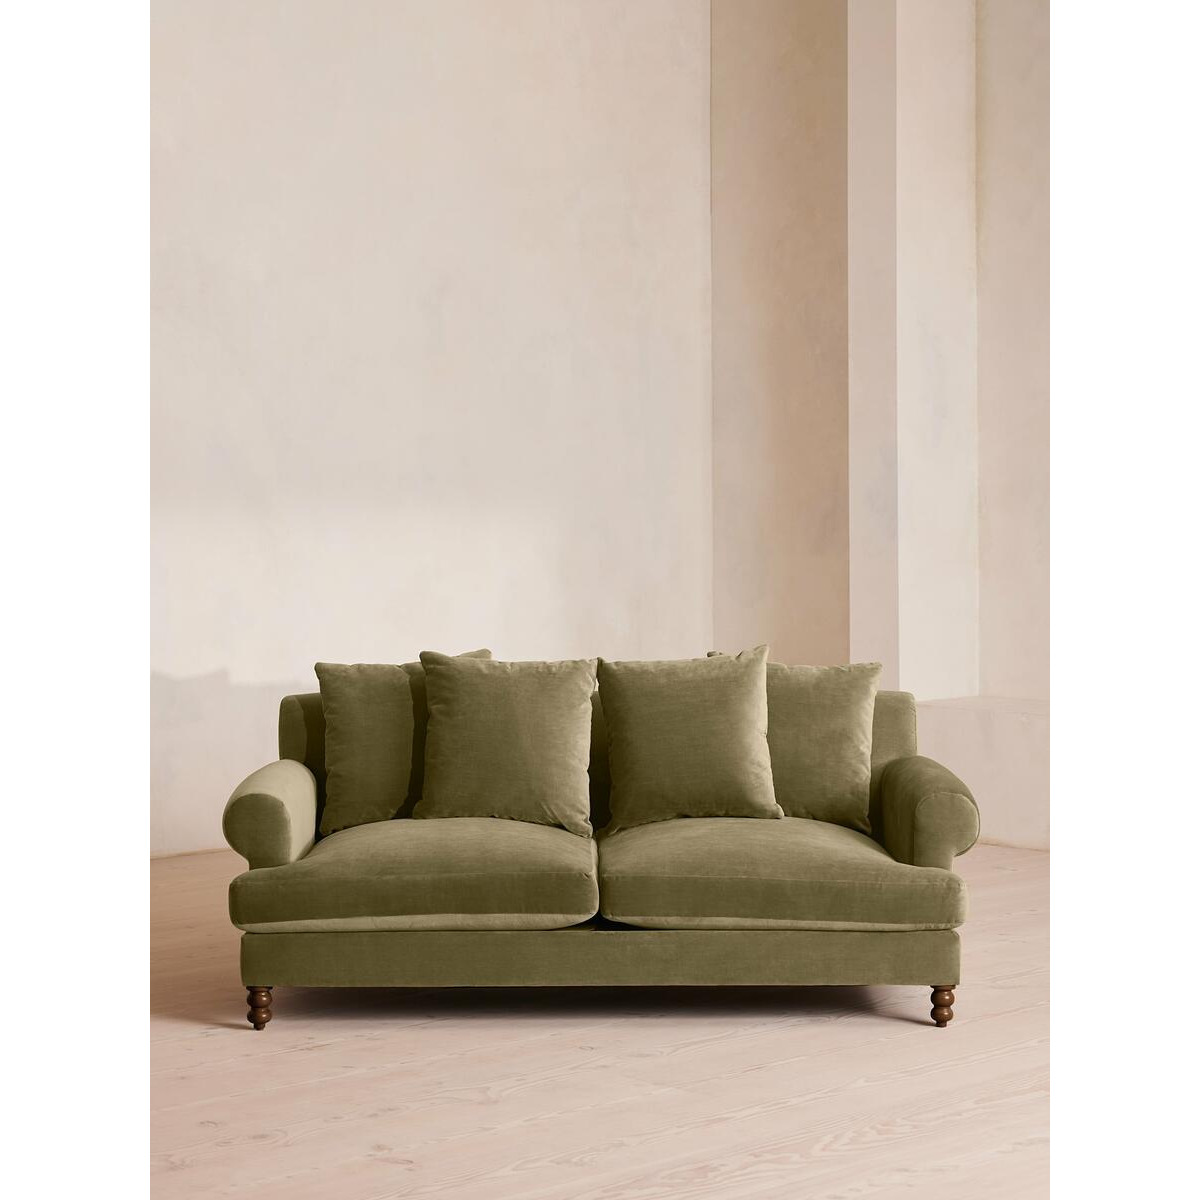 Buy Audrey Two Seater Sofa in Lichen Velvet - crafted in the UK